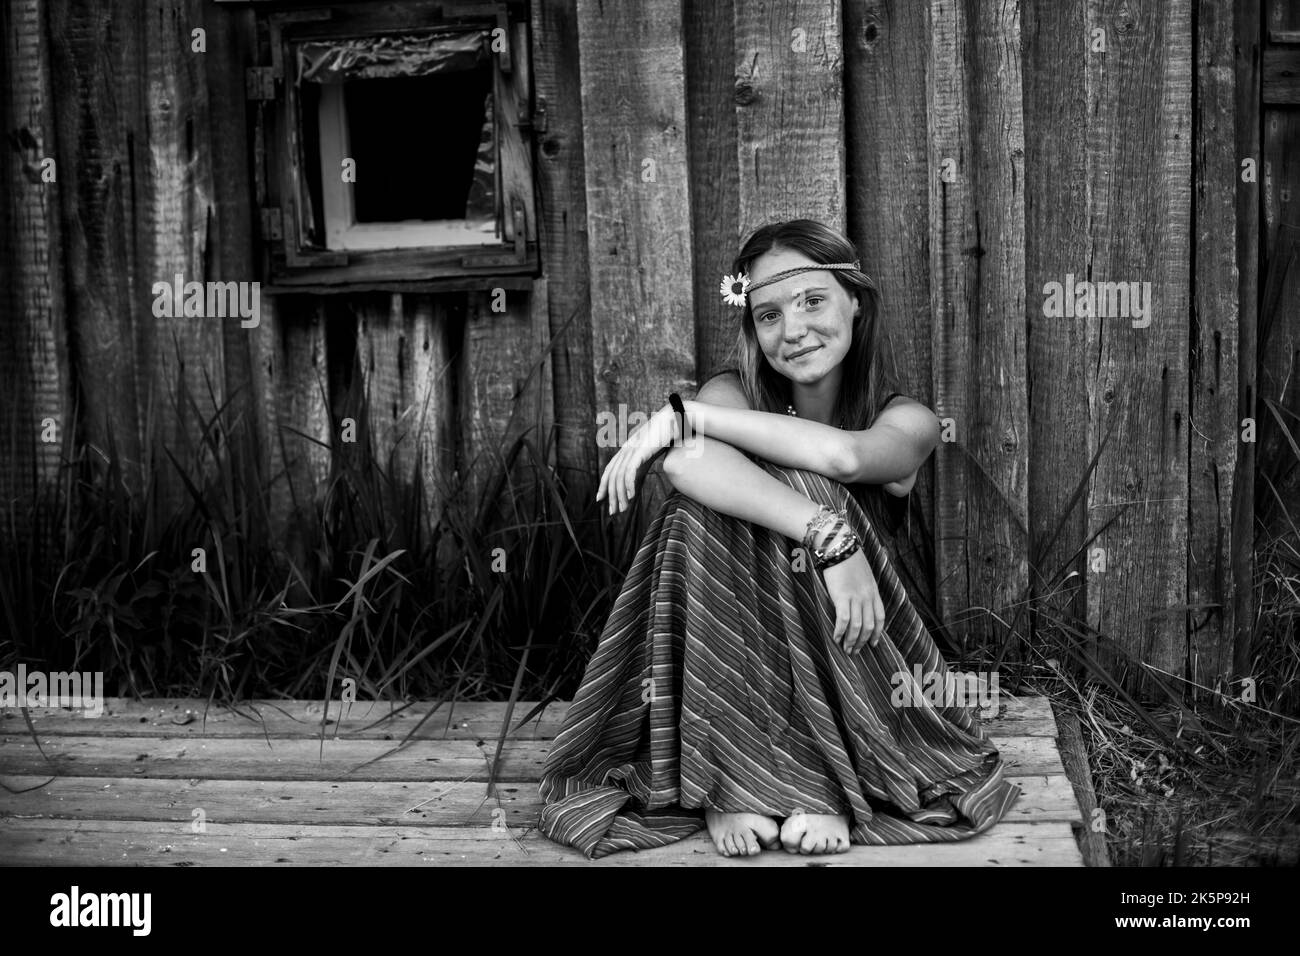 A young hippy girl outdoors in the village. Black and white photo. Stock Photo